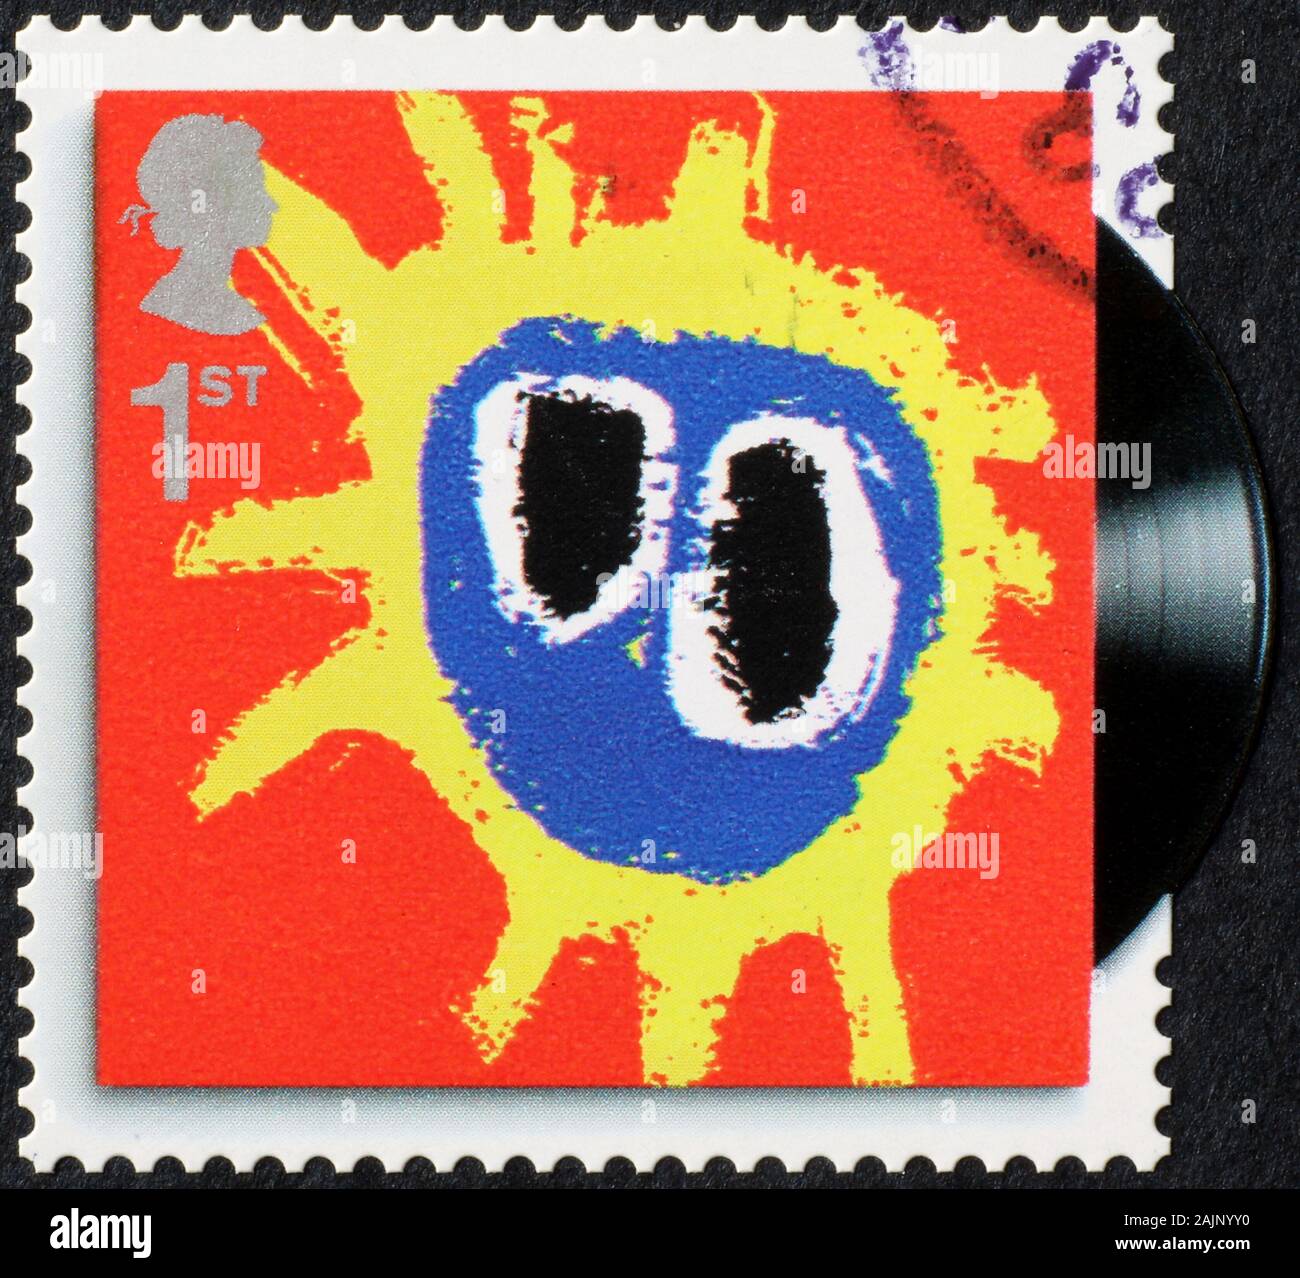 Screamadelica cover by Primal Scream on postage stamp Stock Photo